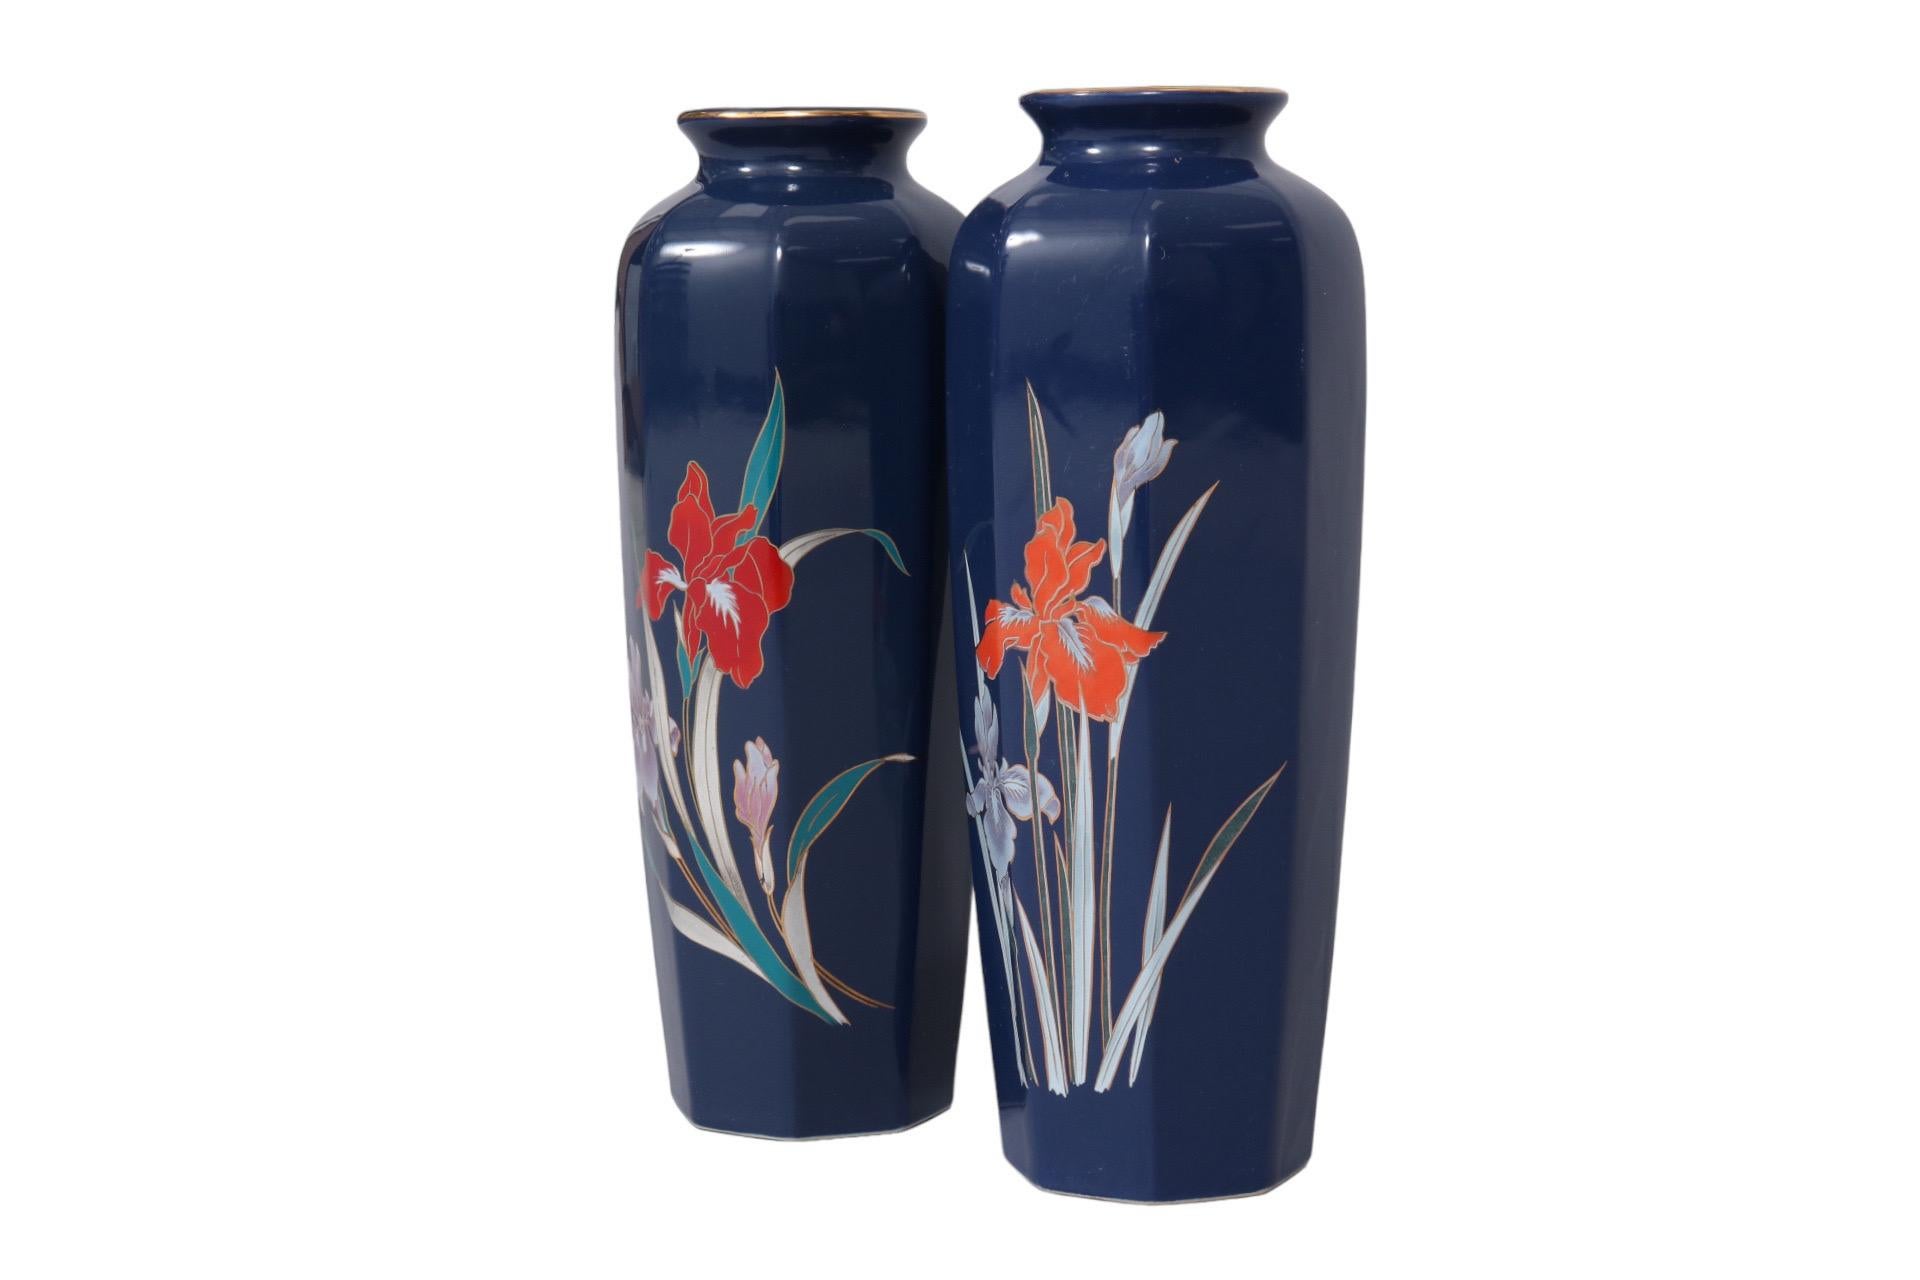 A near pair of Japanese fine China vases in navy blue. Octagonal bodies are hand painted in front with gilt lined bold red and lilac tiger lilies. A shallow neck is lined with gold. Marked ‘fine China Japan’ underneath. Dimensions per vase.